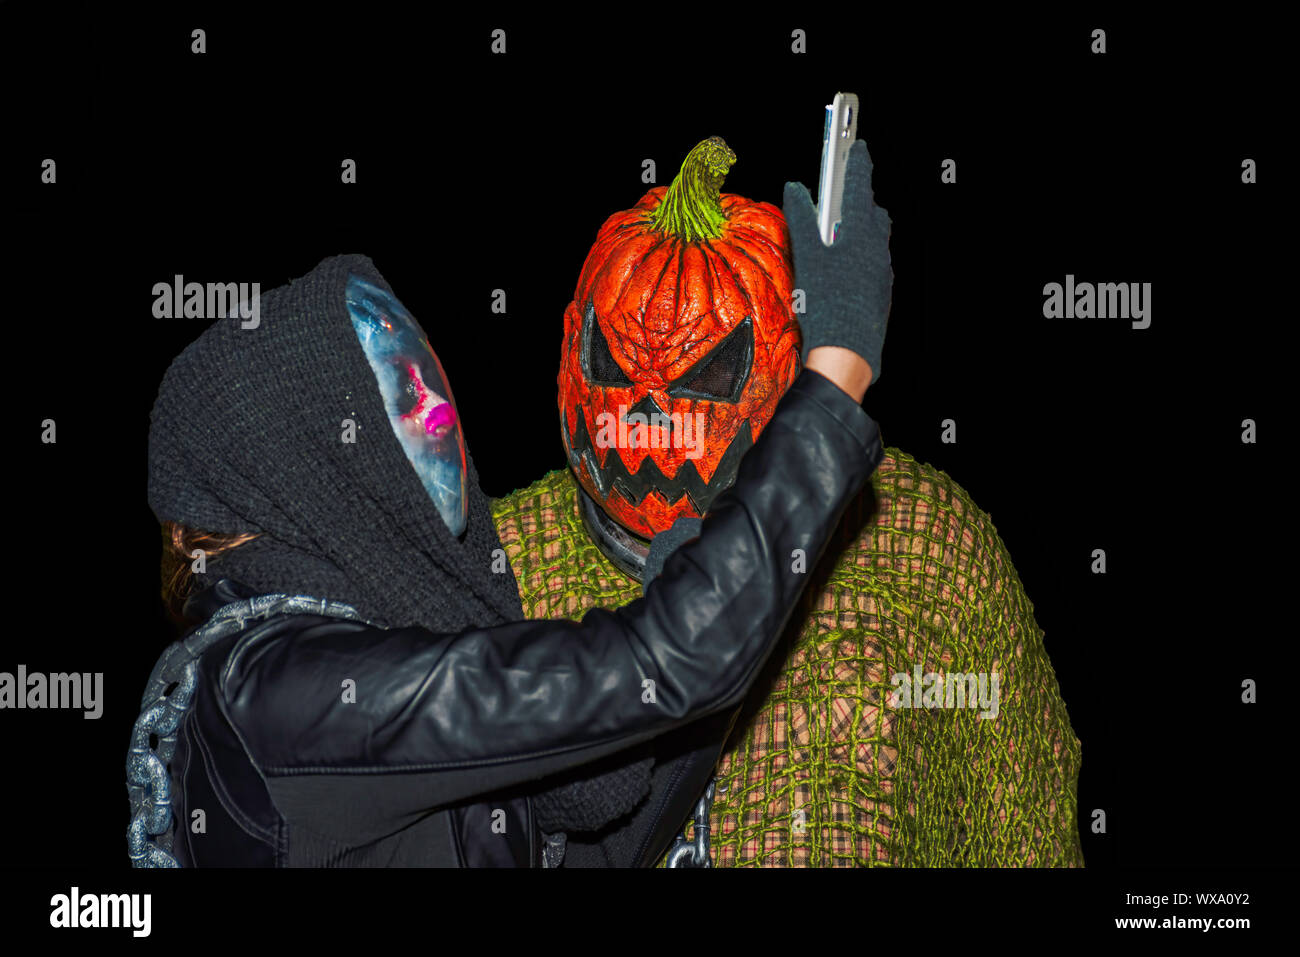 Salem Massachusetts USA 10/31/2015. Someone in costume takeing a selfie with Pumpkin head. Editorial use only Stock Photo